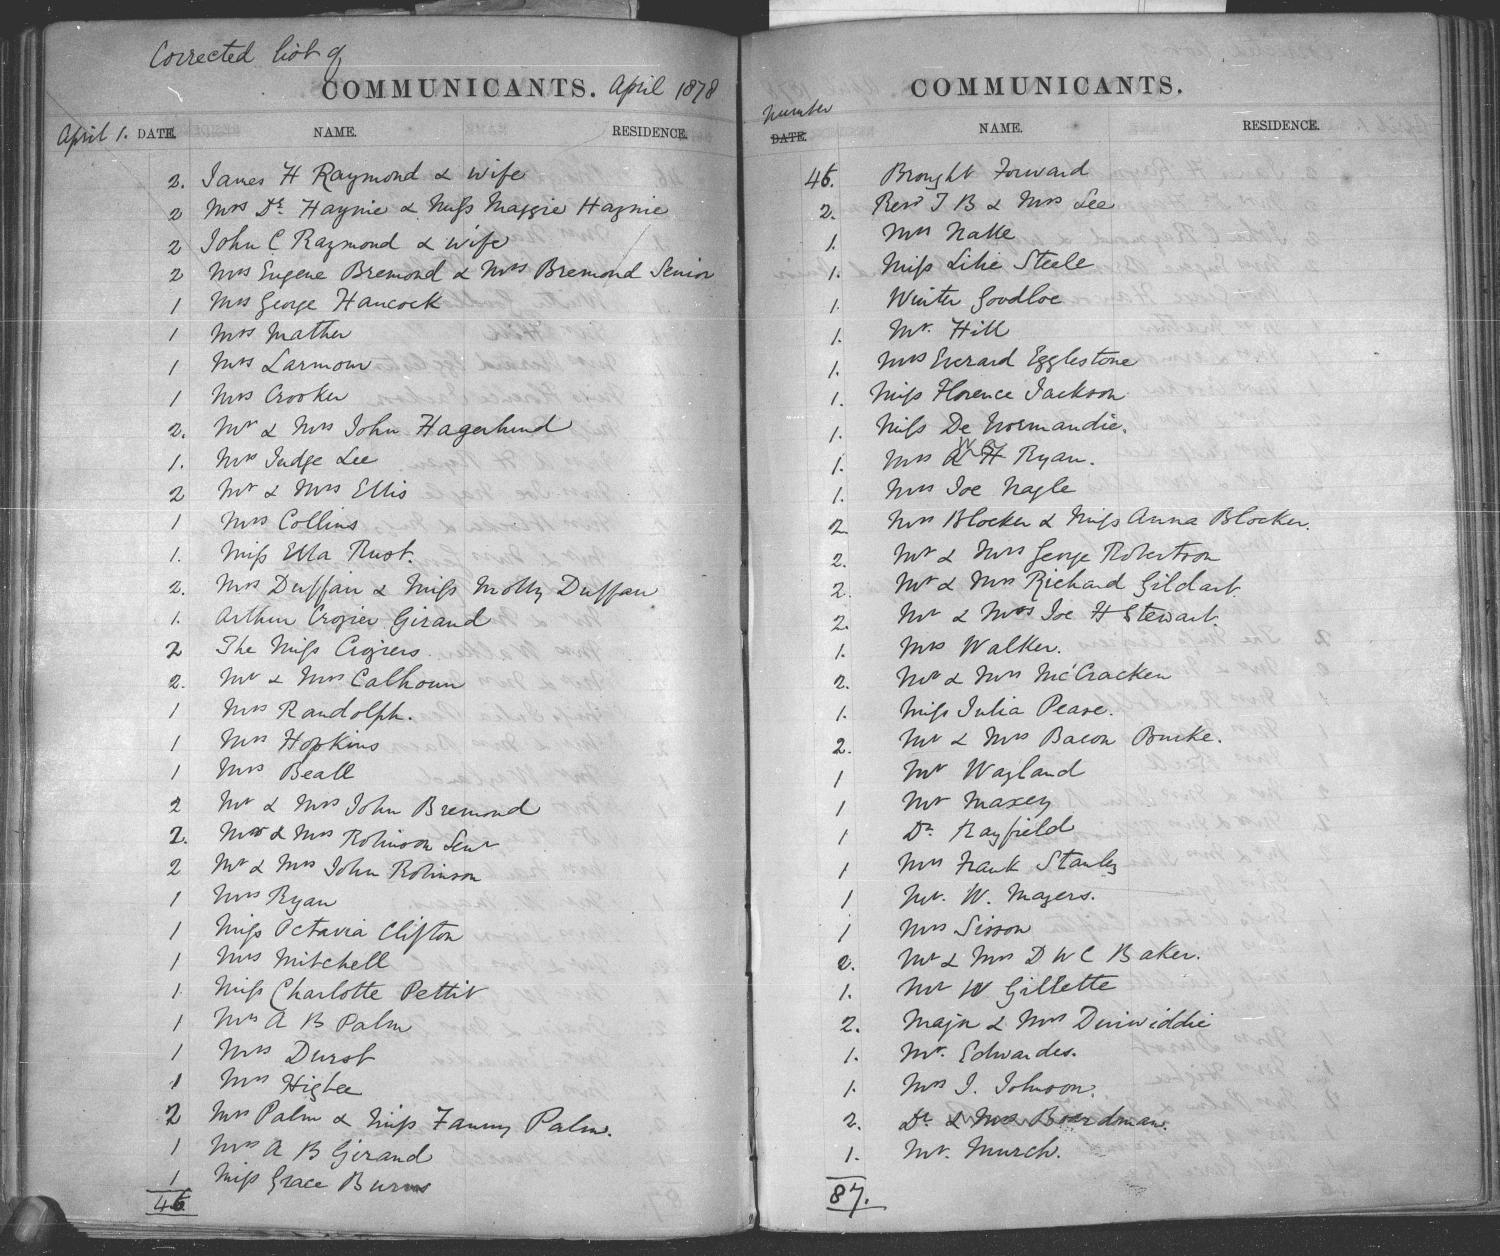 A Complete Parish Register, for the use of the Protestant Episcopal Church in the United States
                                                
                                                    200
                                                